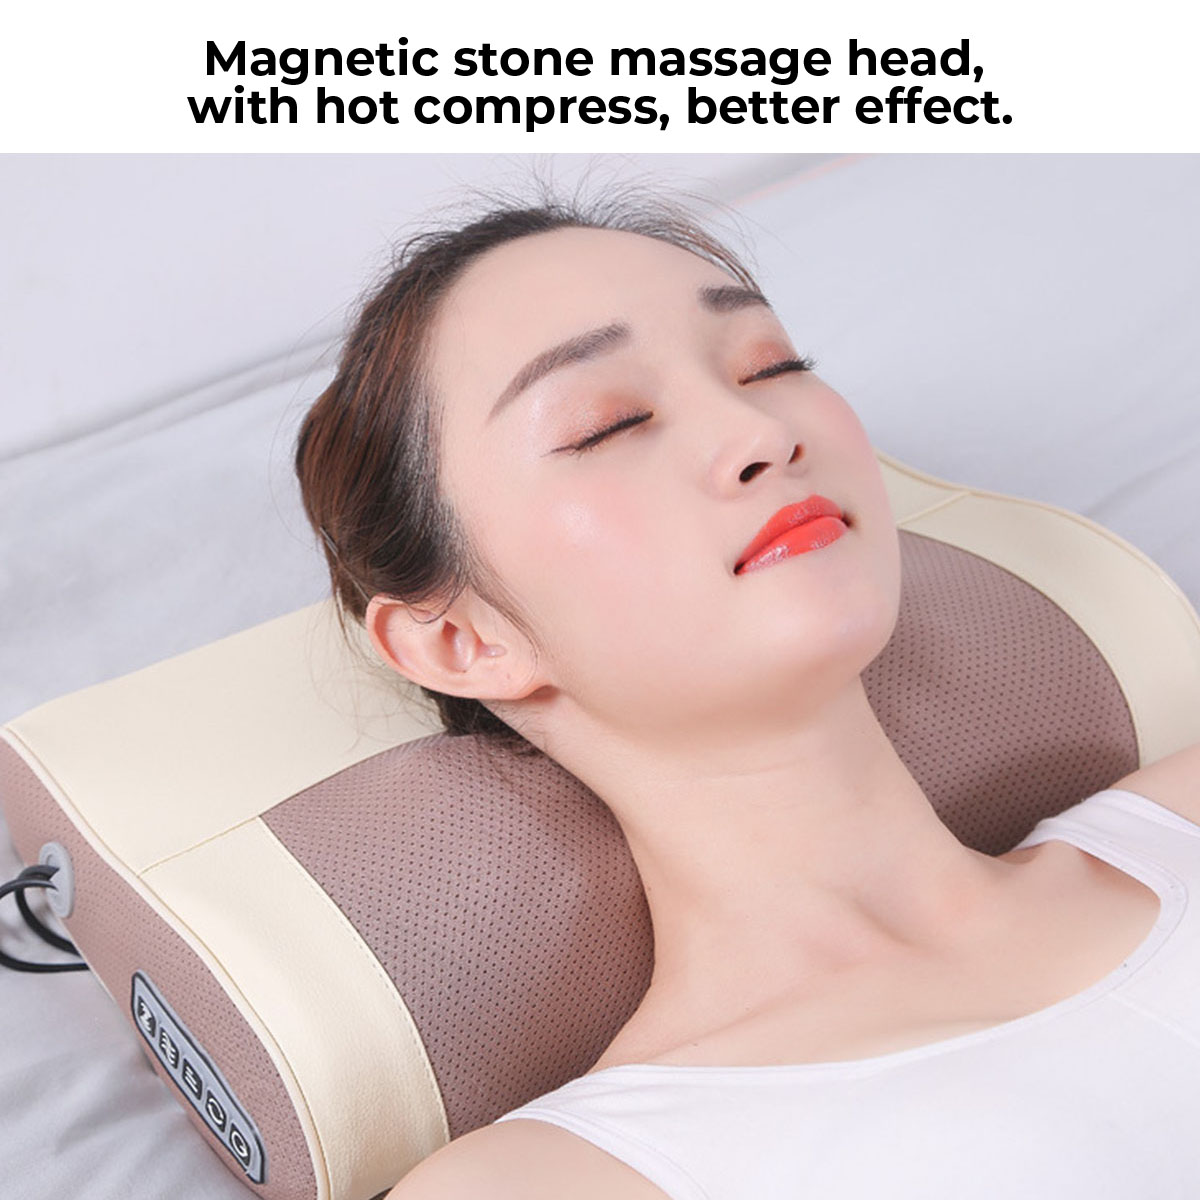 16-Heads-Neck-Massage-Pillow-3-Gears-Heating-Magnetic-Therapy-Massage-Device-for-Neck-Waist-Abdomina-1804675-4